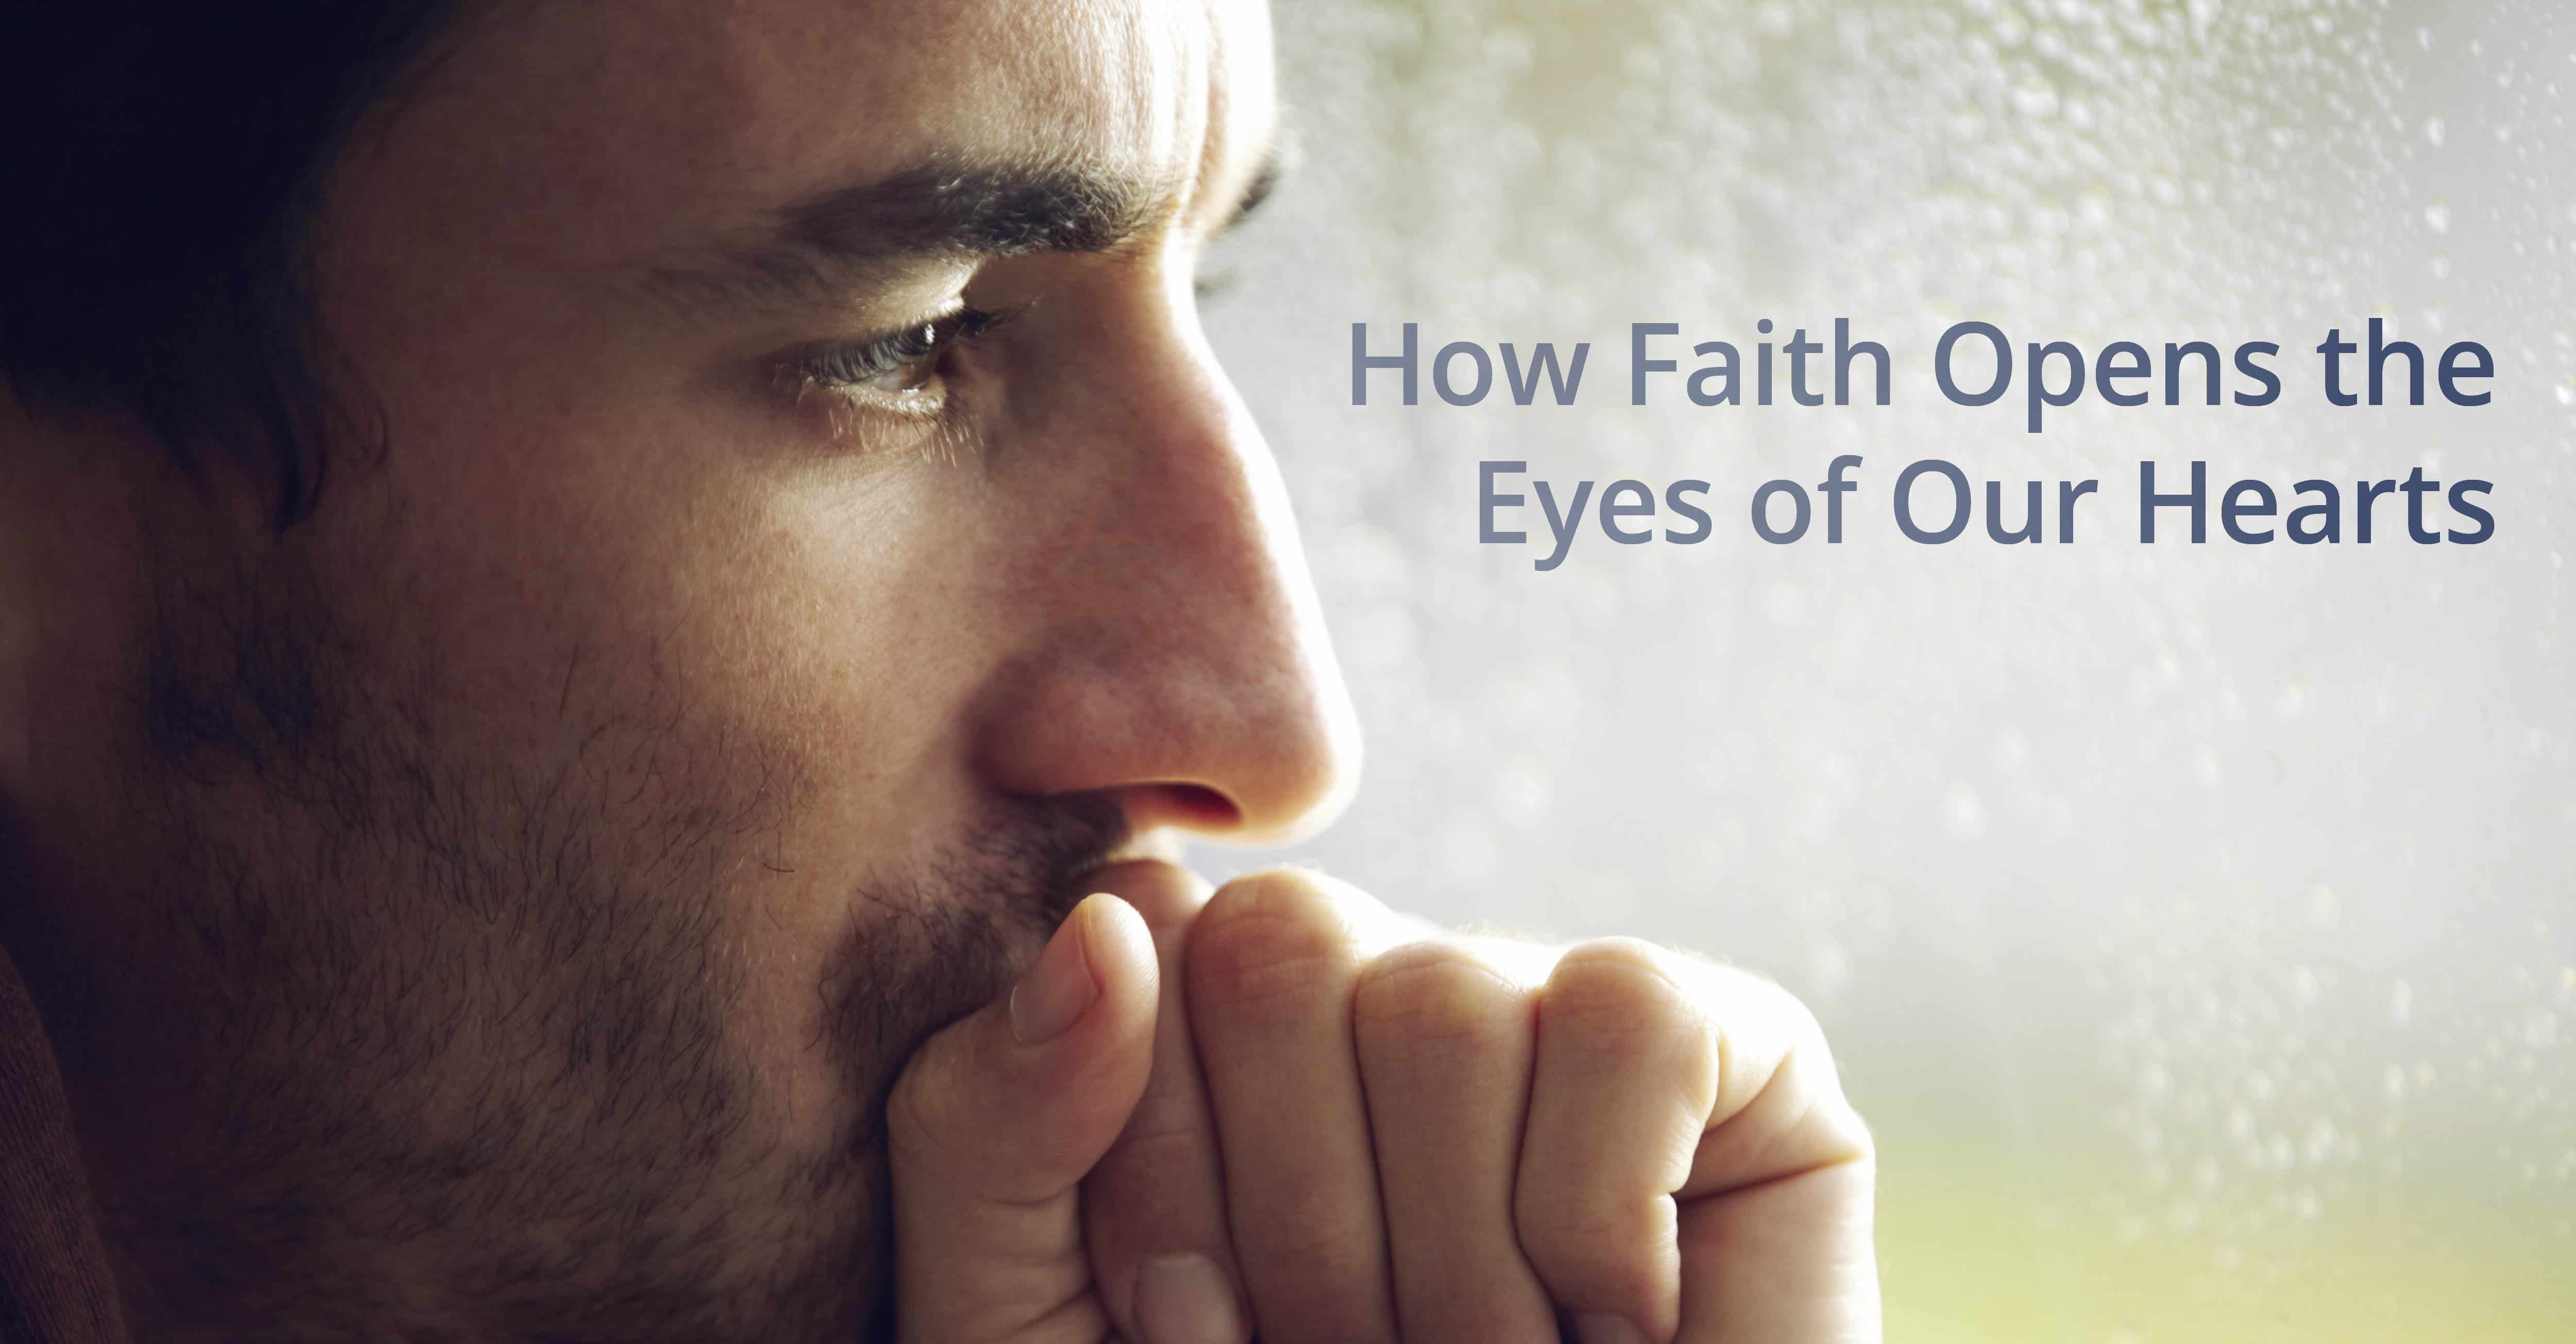 How faith opens the eyes of our hearts